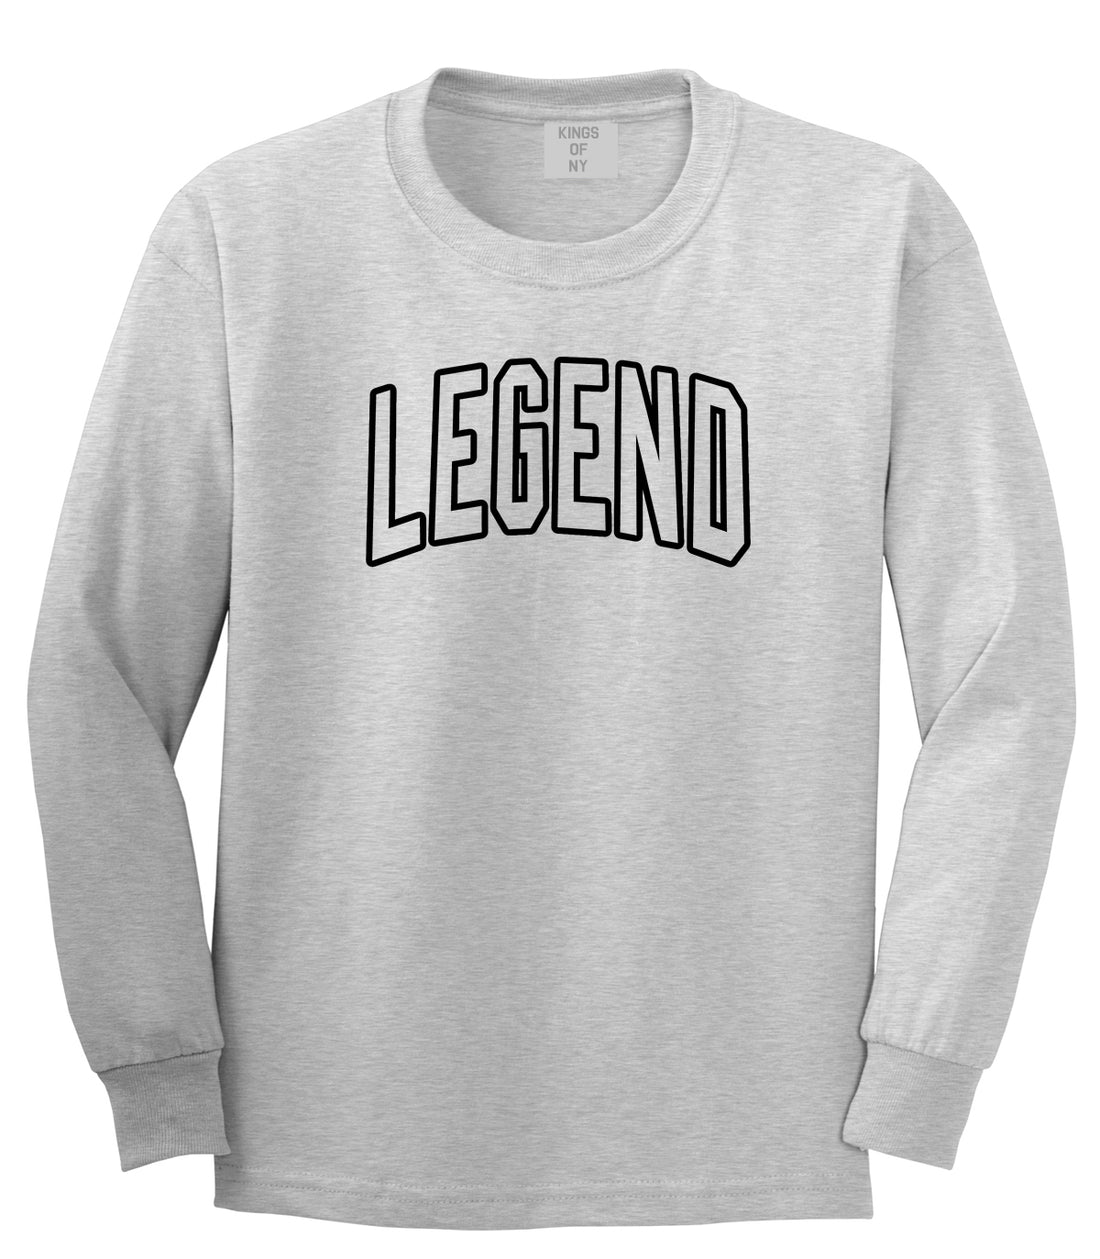 Legend Outline Mens Long Sleeve T-Shirt Grey by Kings Of NY